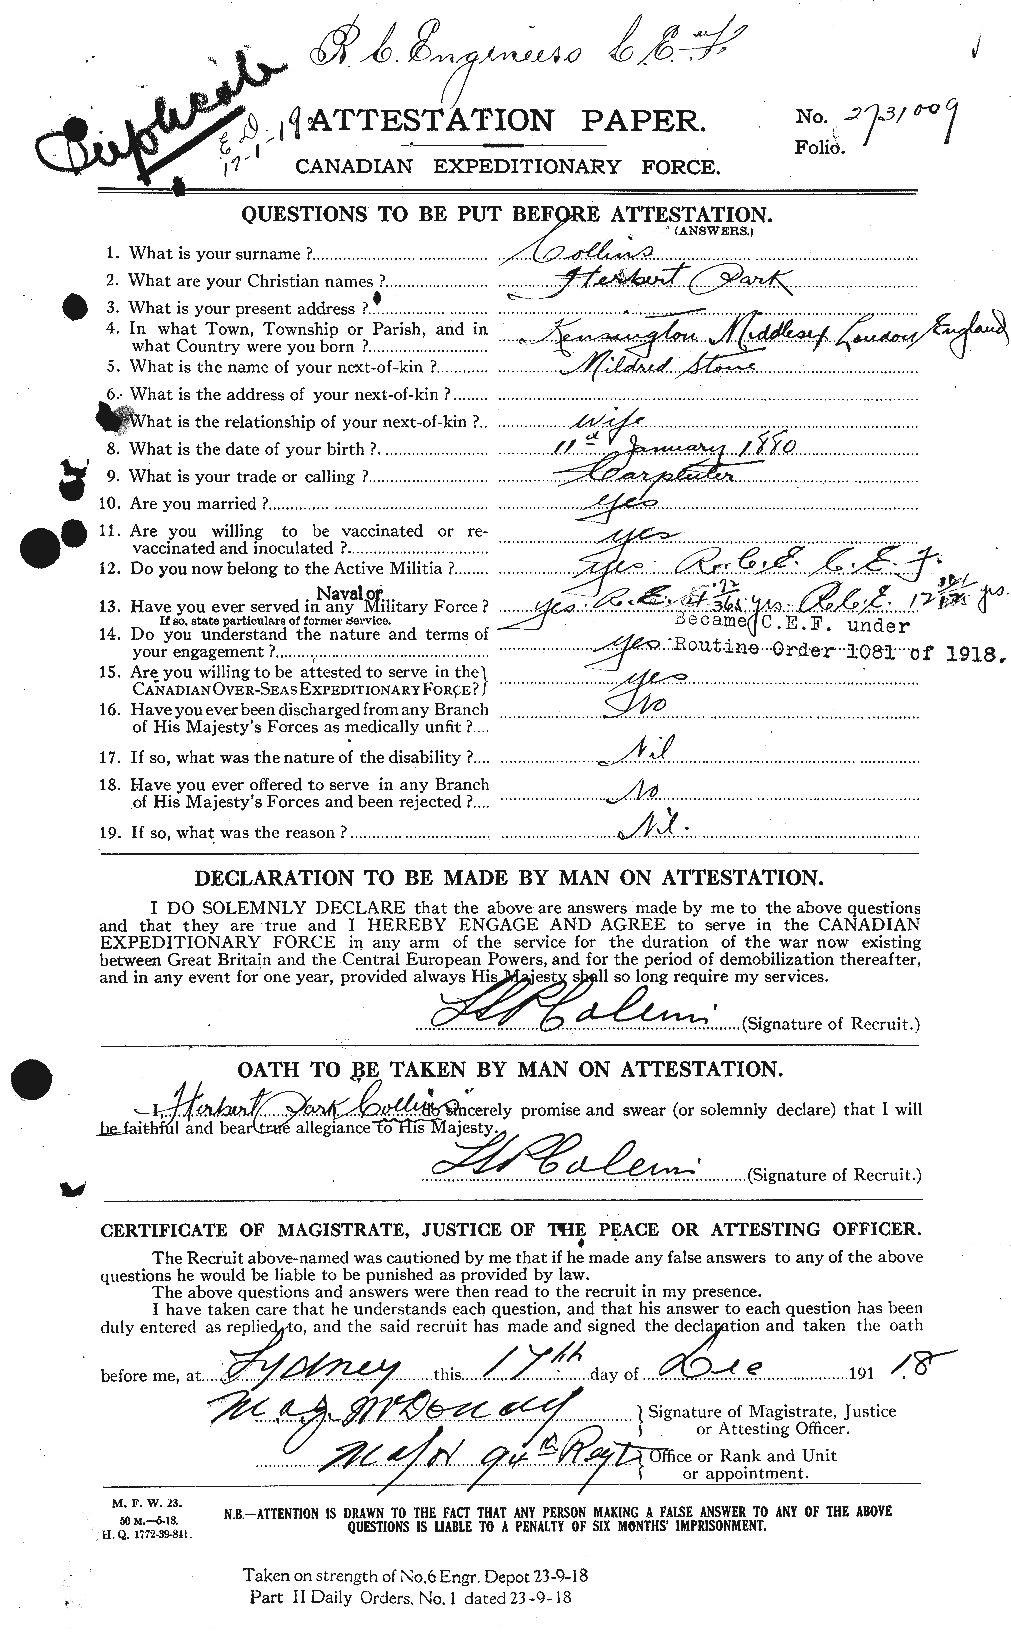 Personnel Records of the First World War - CEF 069999a